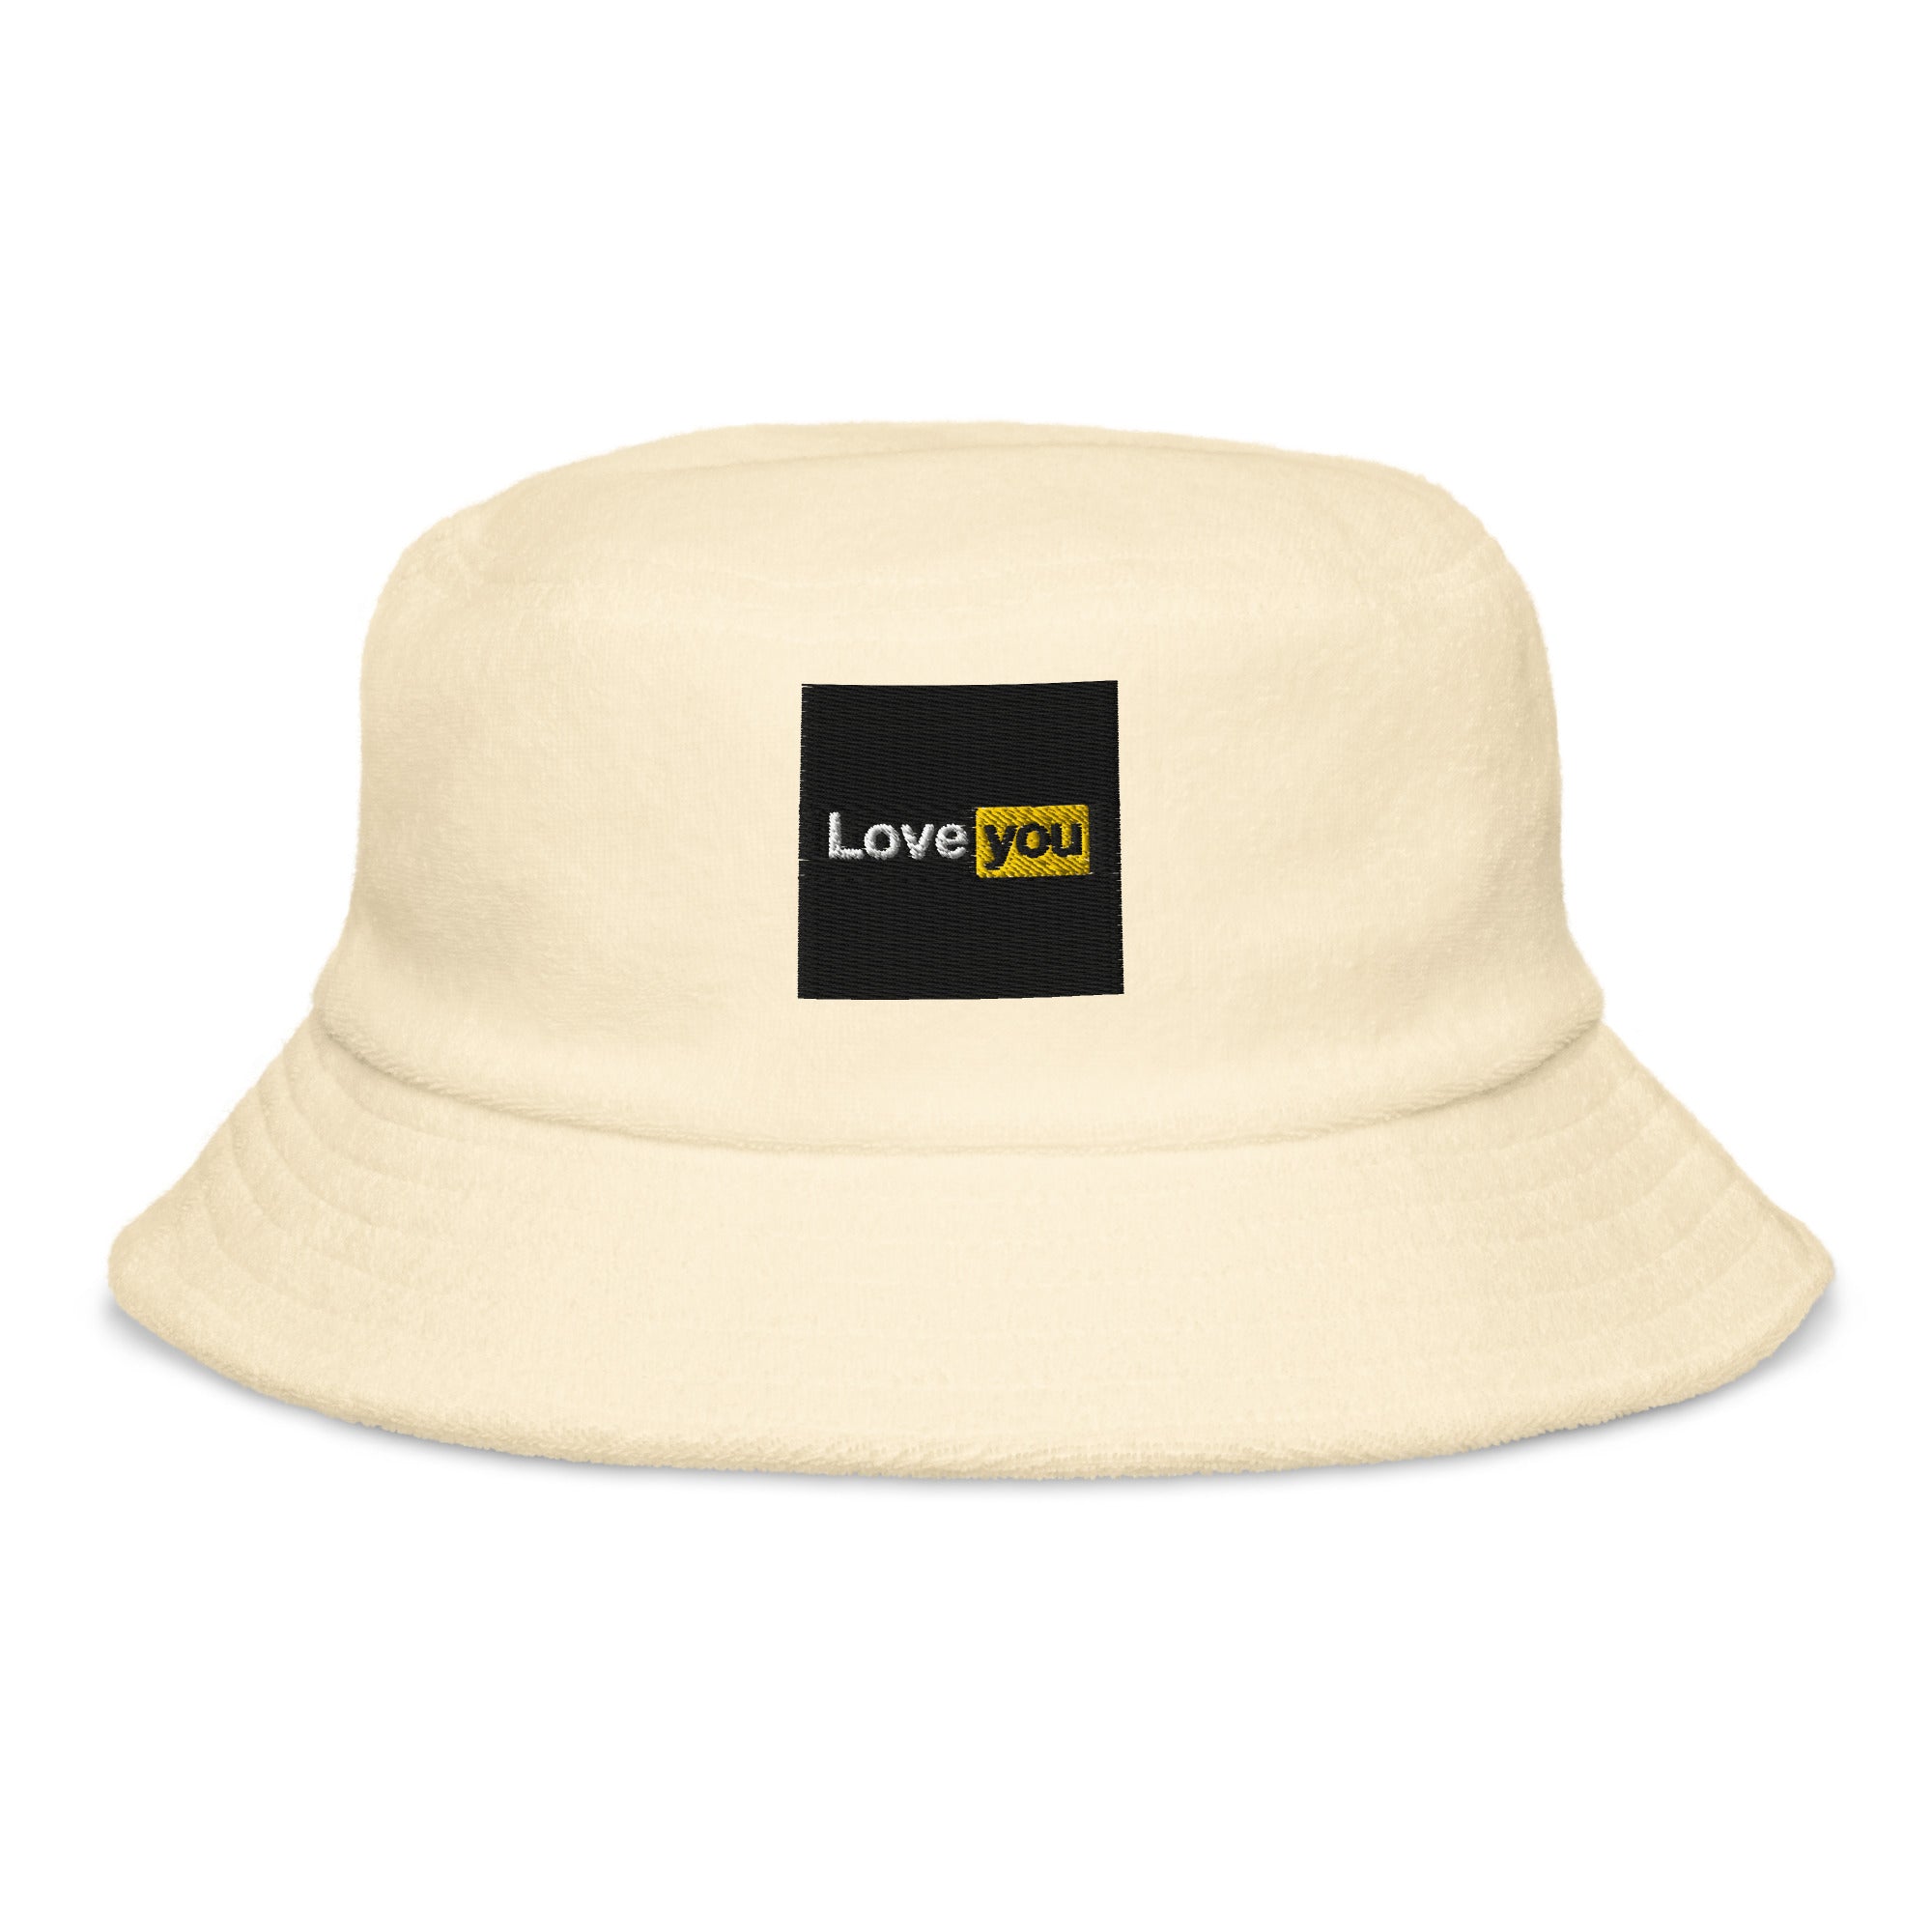 PH (LoveYou) Terry cloth bucket hat